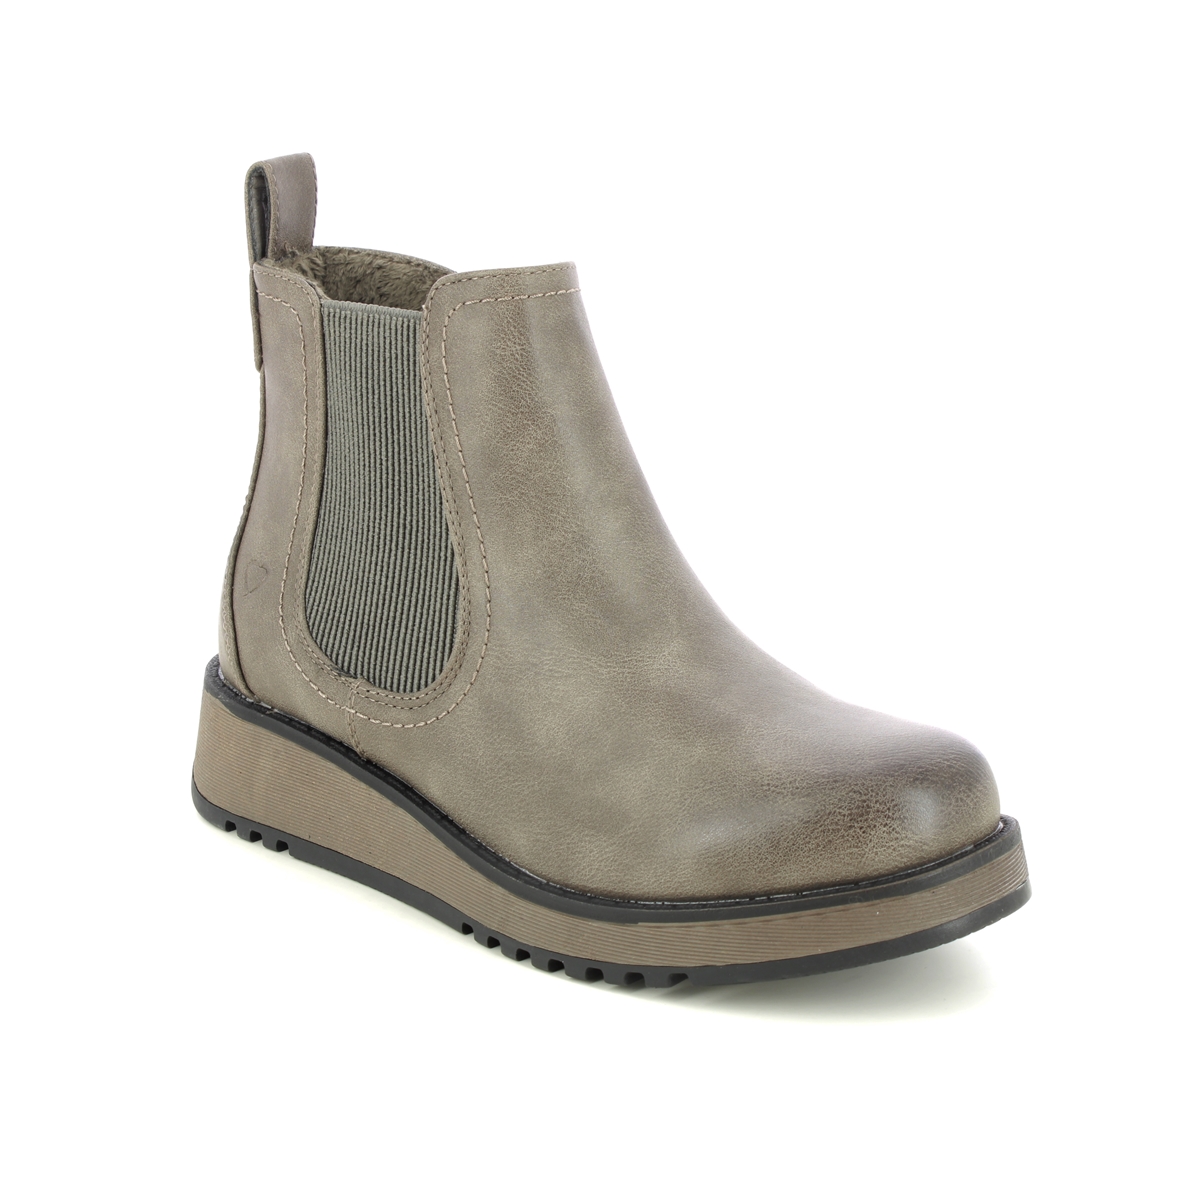 Heavenly Feet Rolo   2 New Dark Taupe Womens Chelsea Boots 3503-50 In Size 4 In Plain Dark Taupe